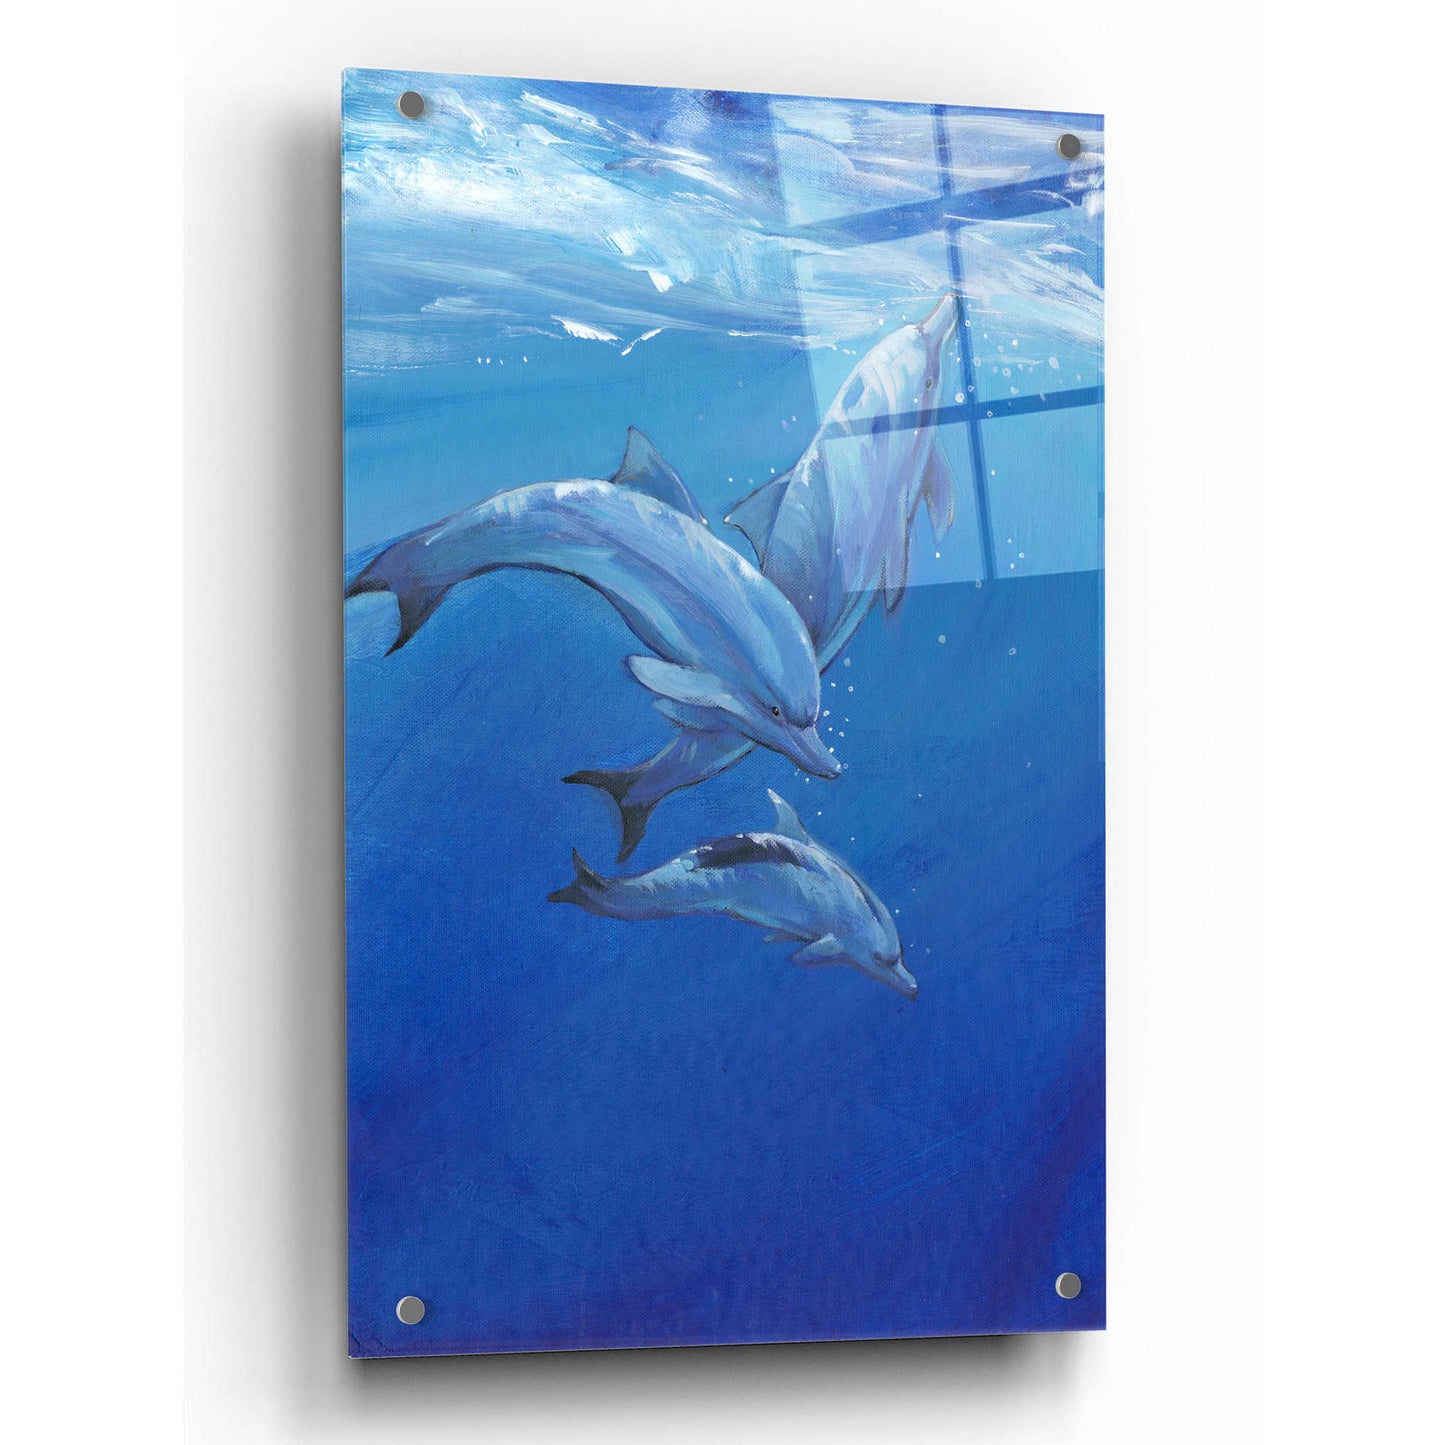 Epic Art 'Under Sea Dolphins' by Tim O'Toole, Acrylic Glass Wall Art,24x36